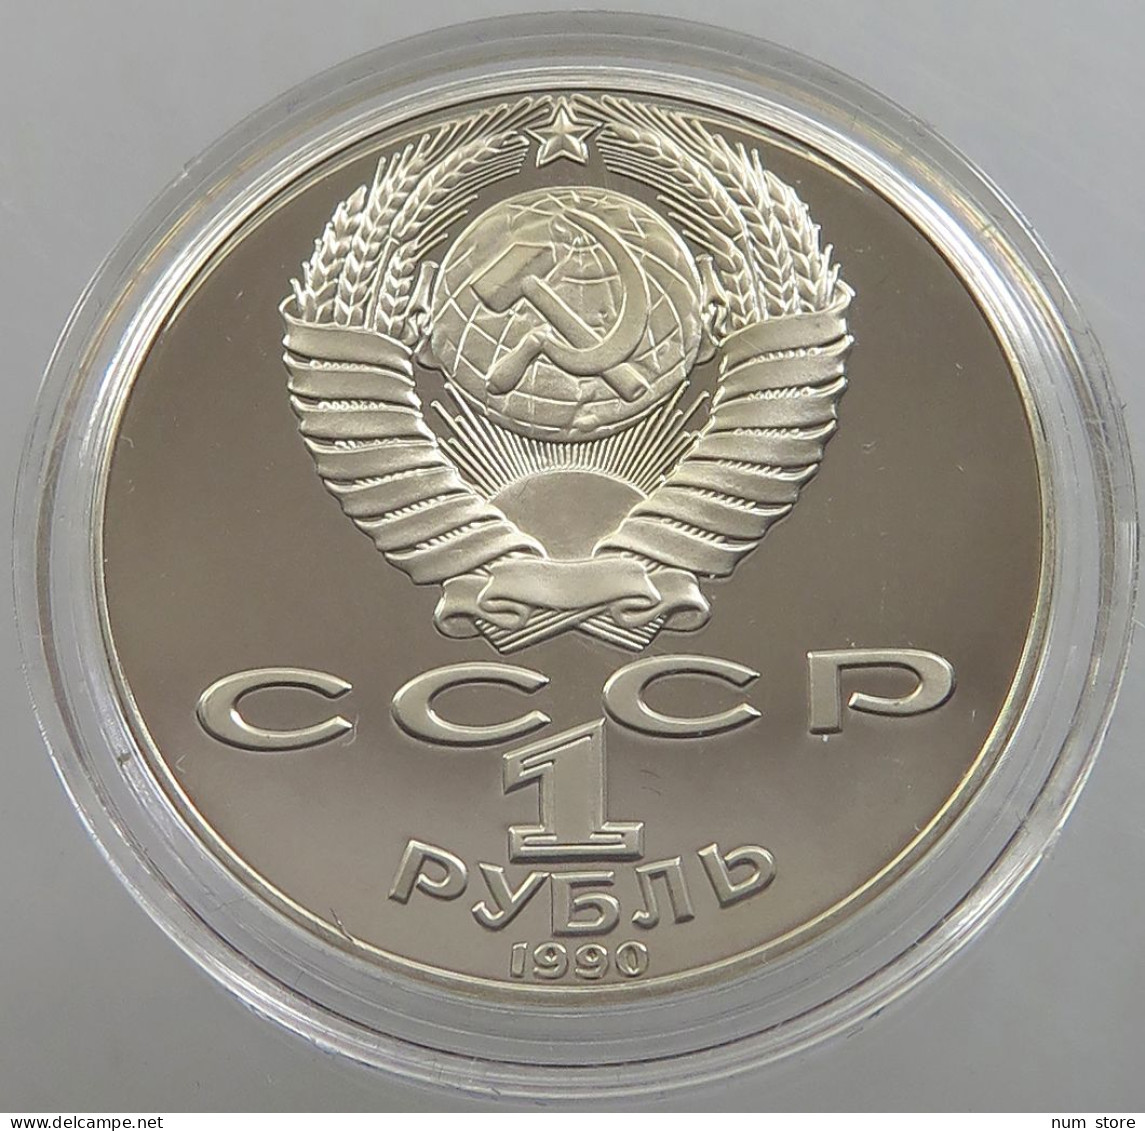 RUSSIA USSR 1 ROUBLE 1990 RAINIS PROOF #sm14 0549 - Russia